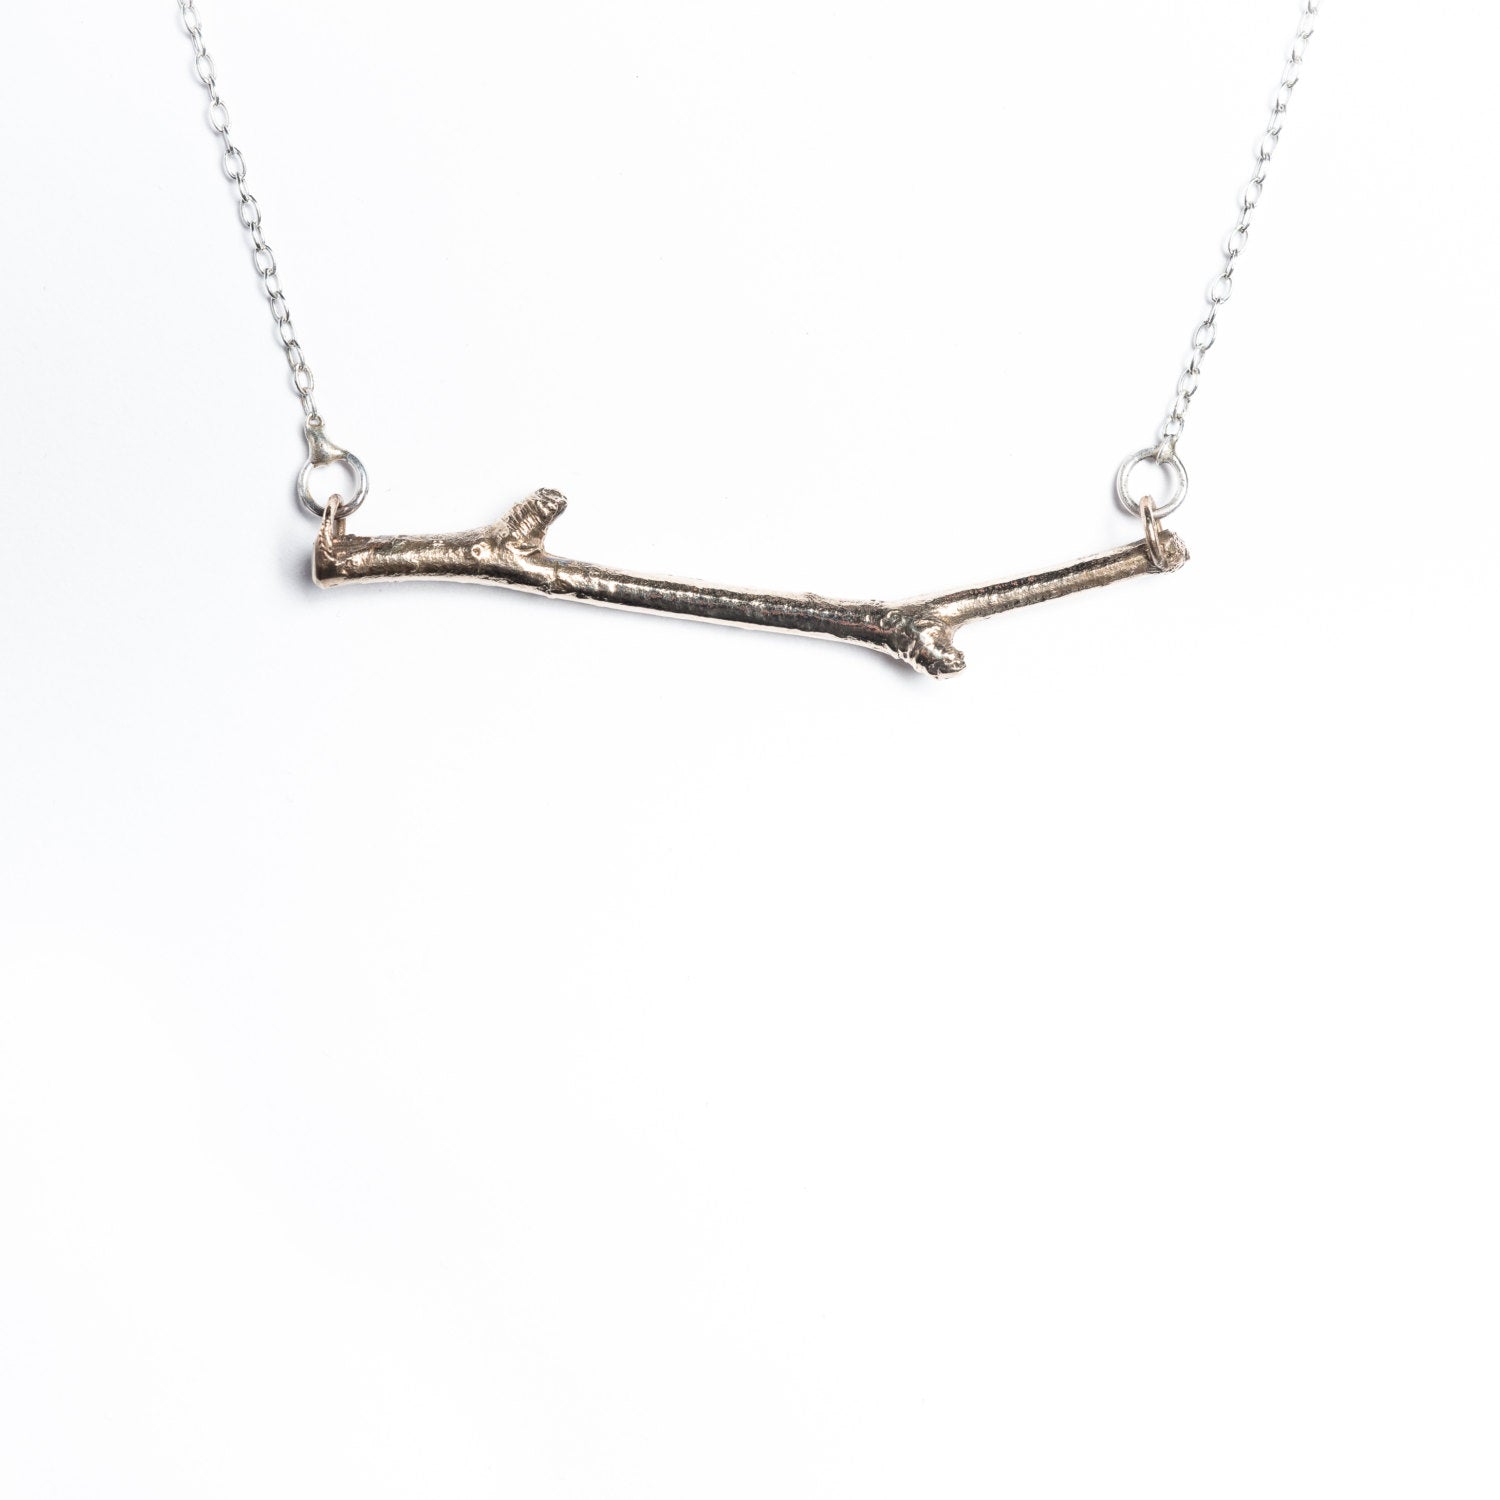 Plain image of the Woodland Necklace on a white background